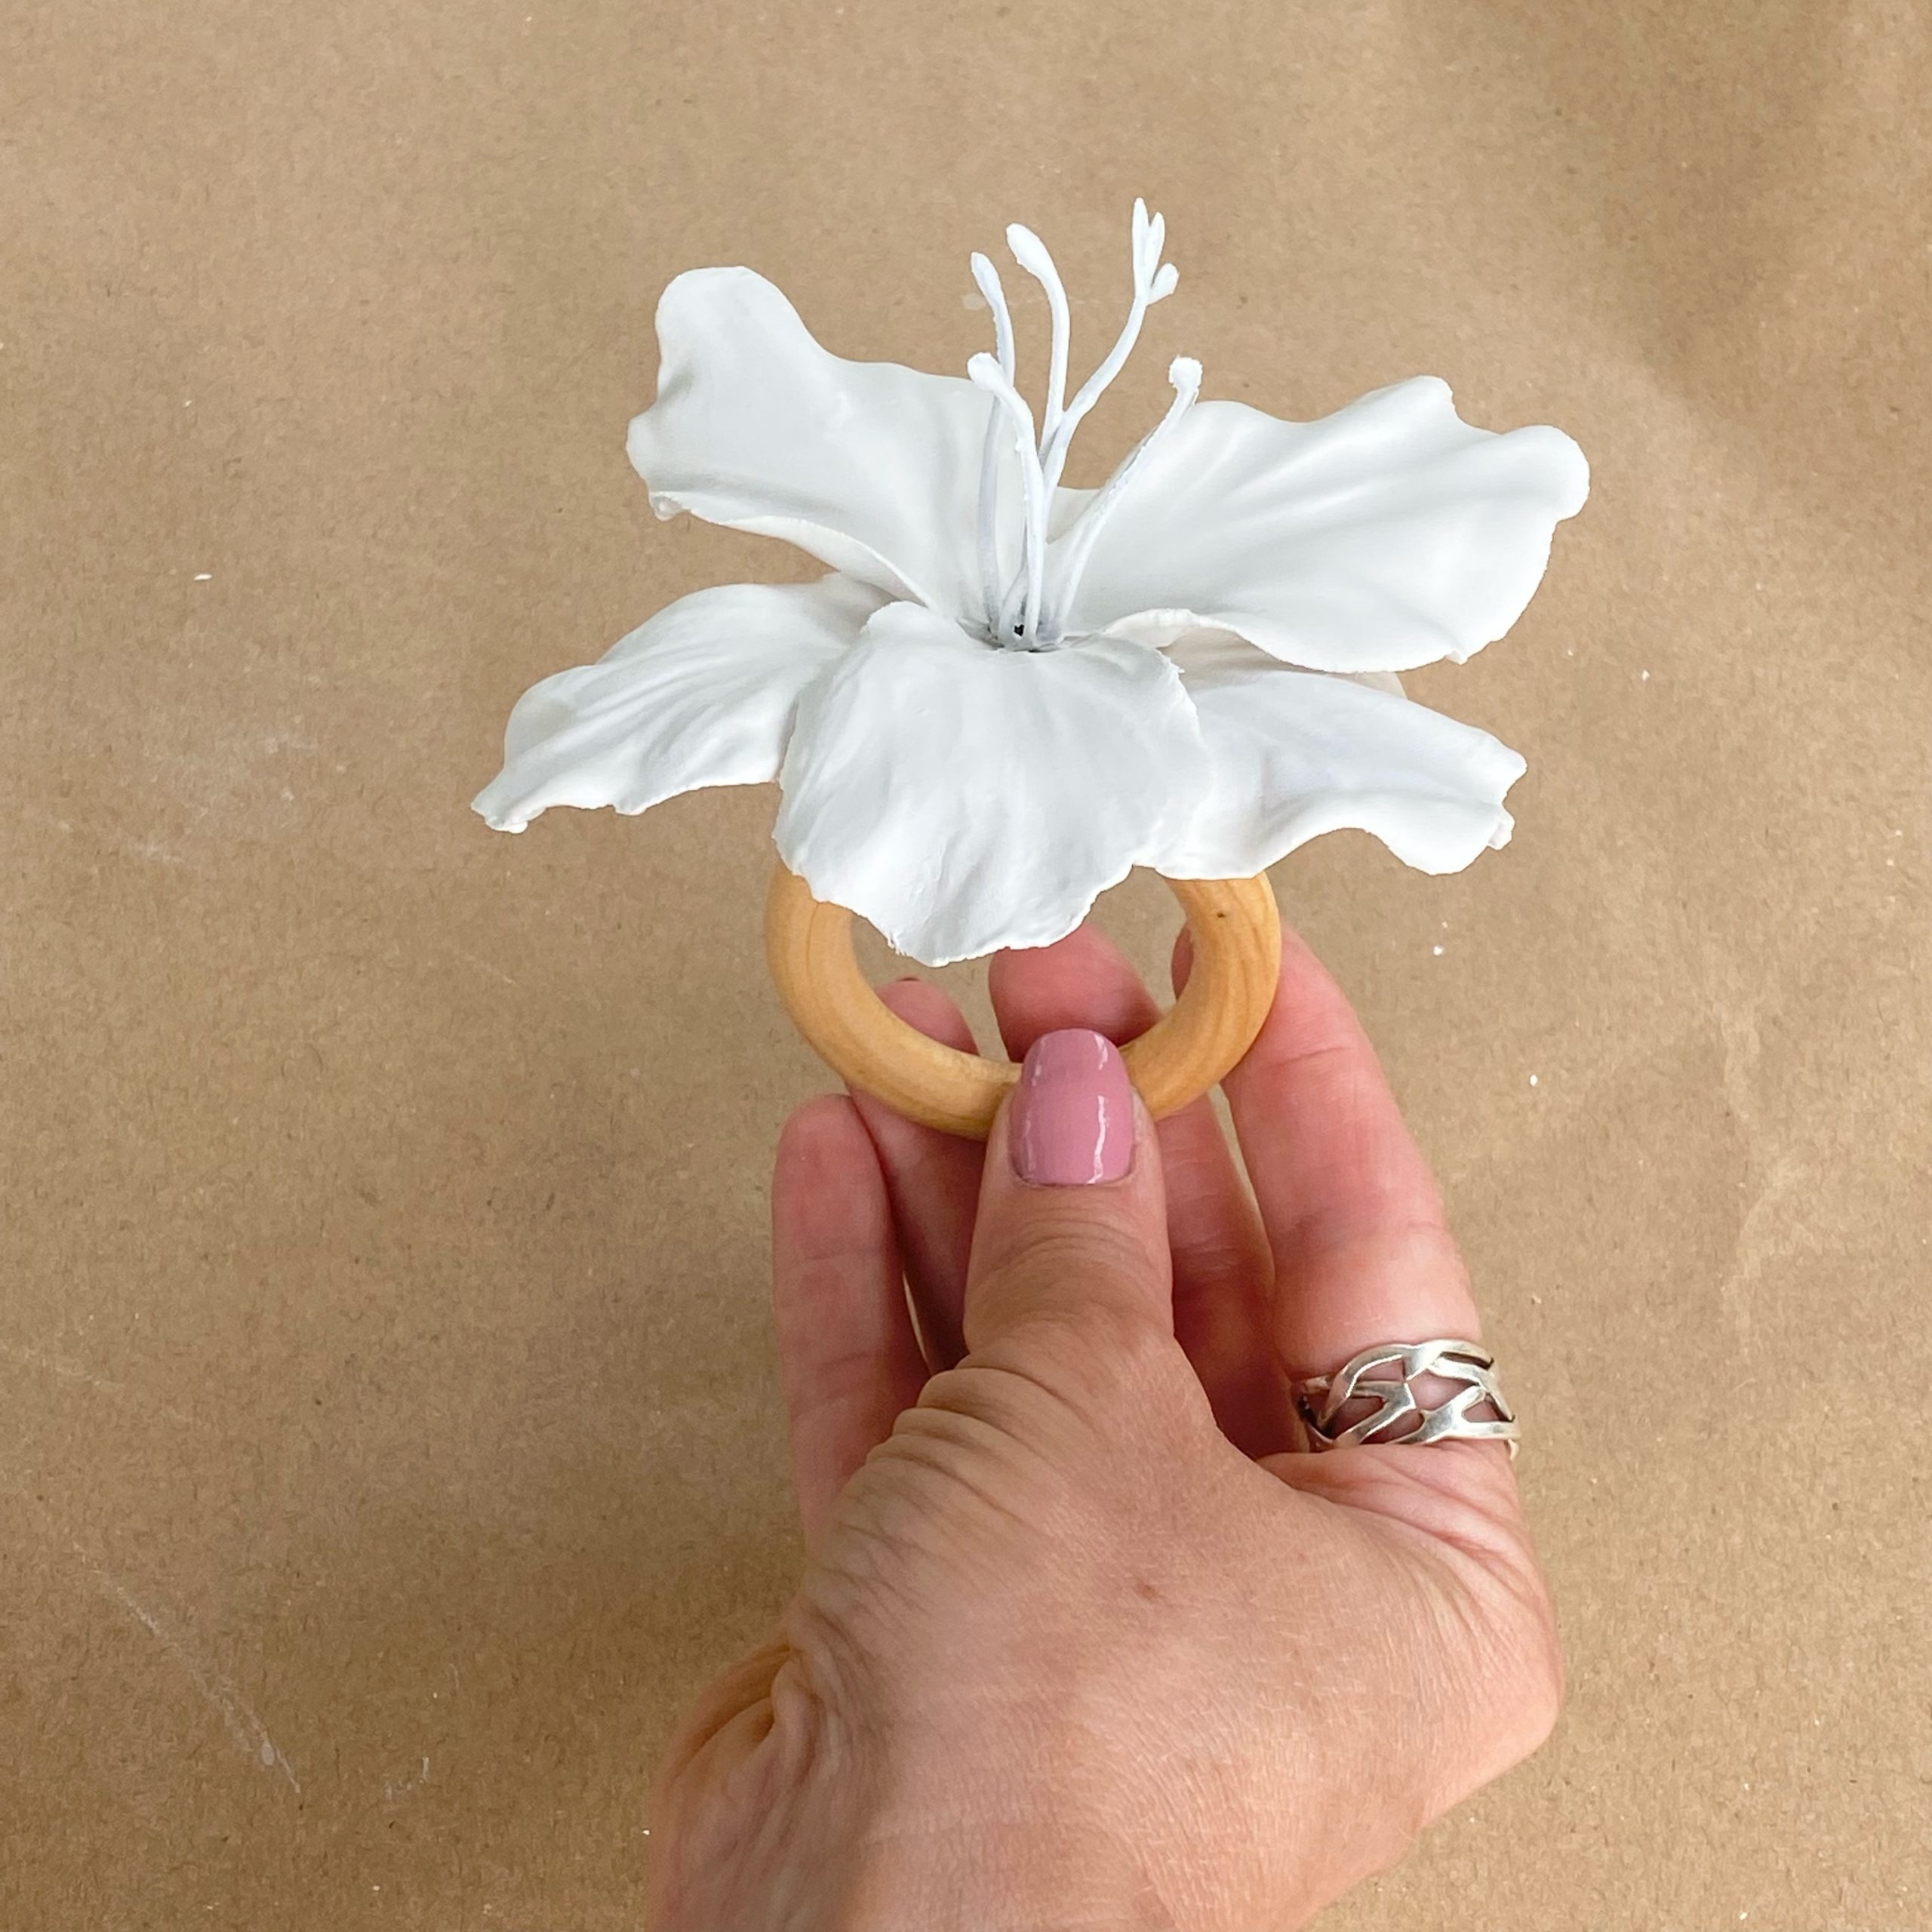 A hand holding up a completed plaster of paris floral napkin ring.